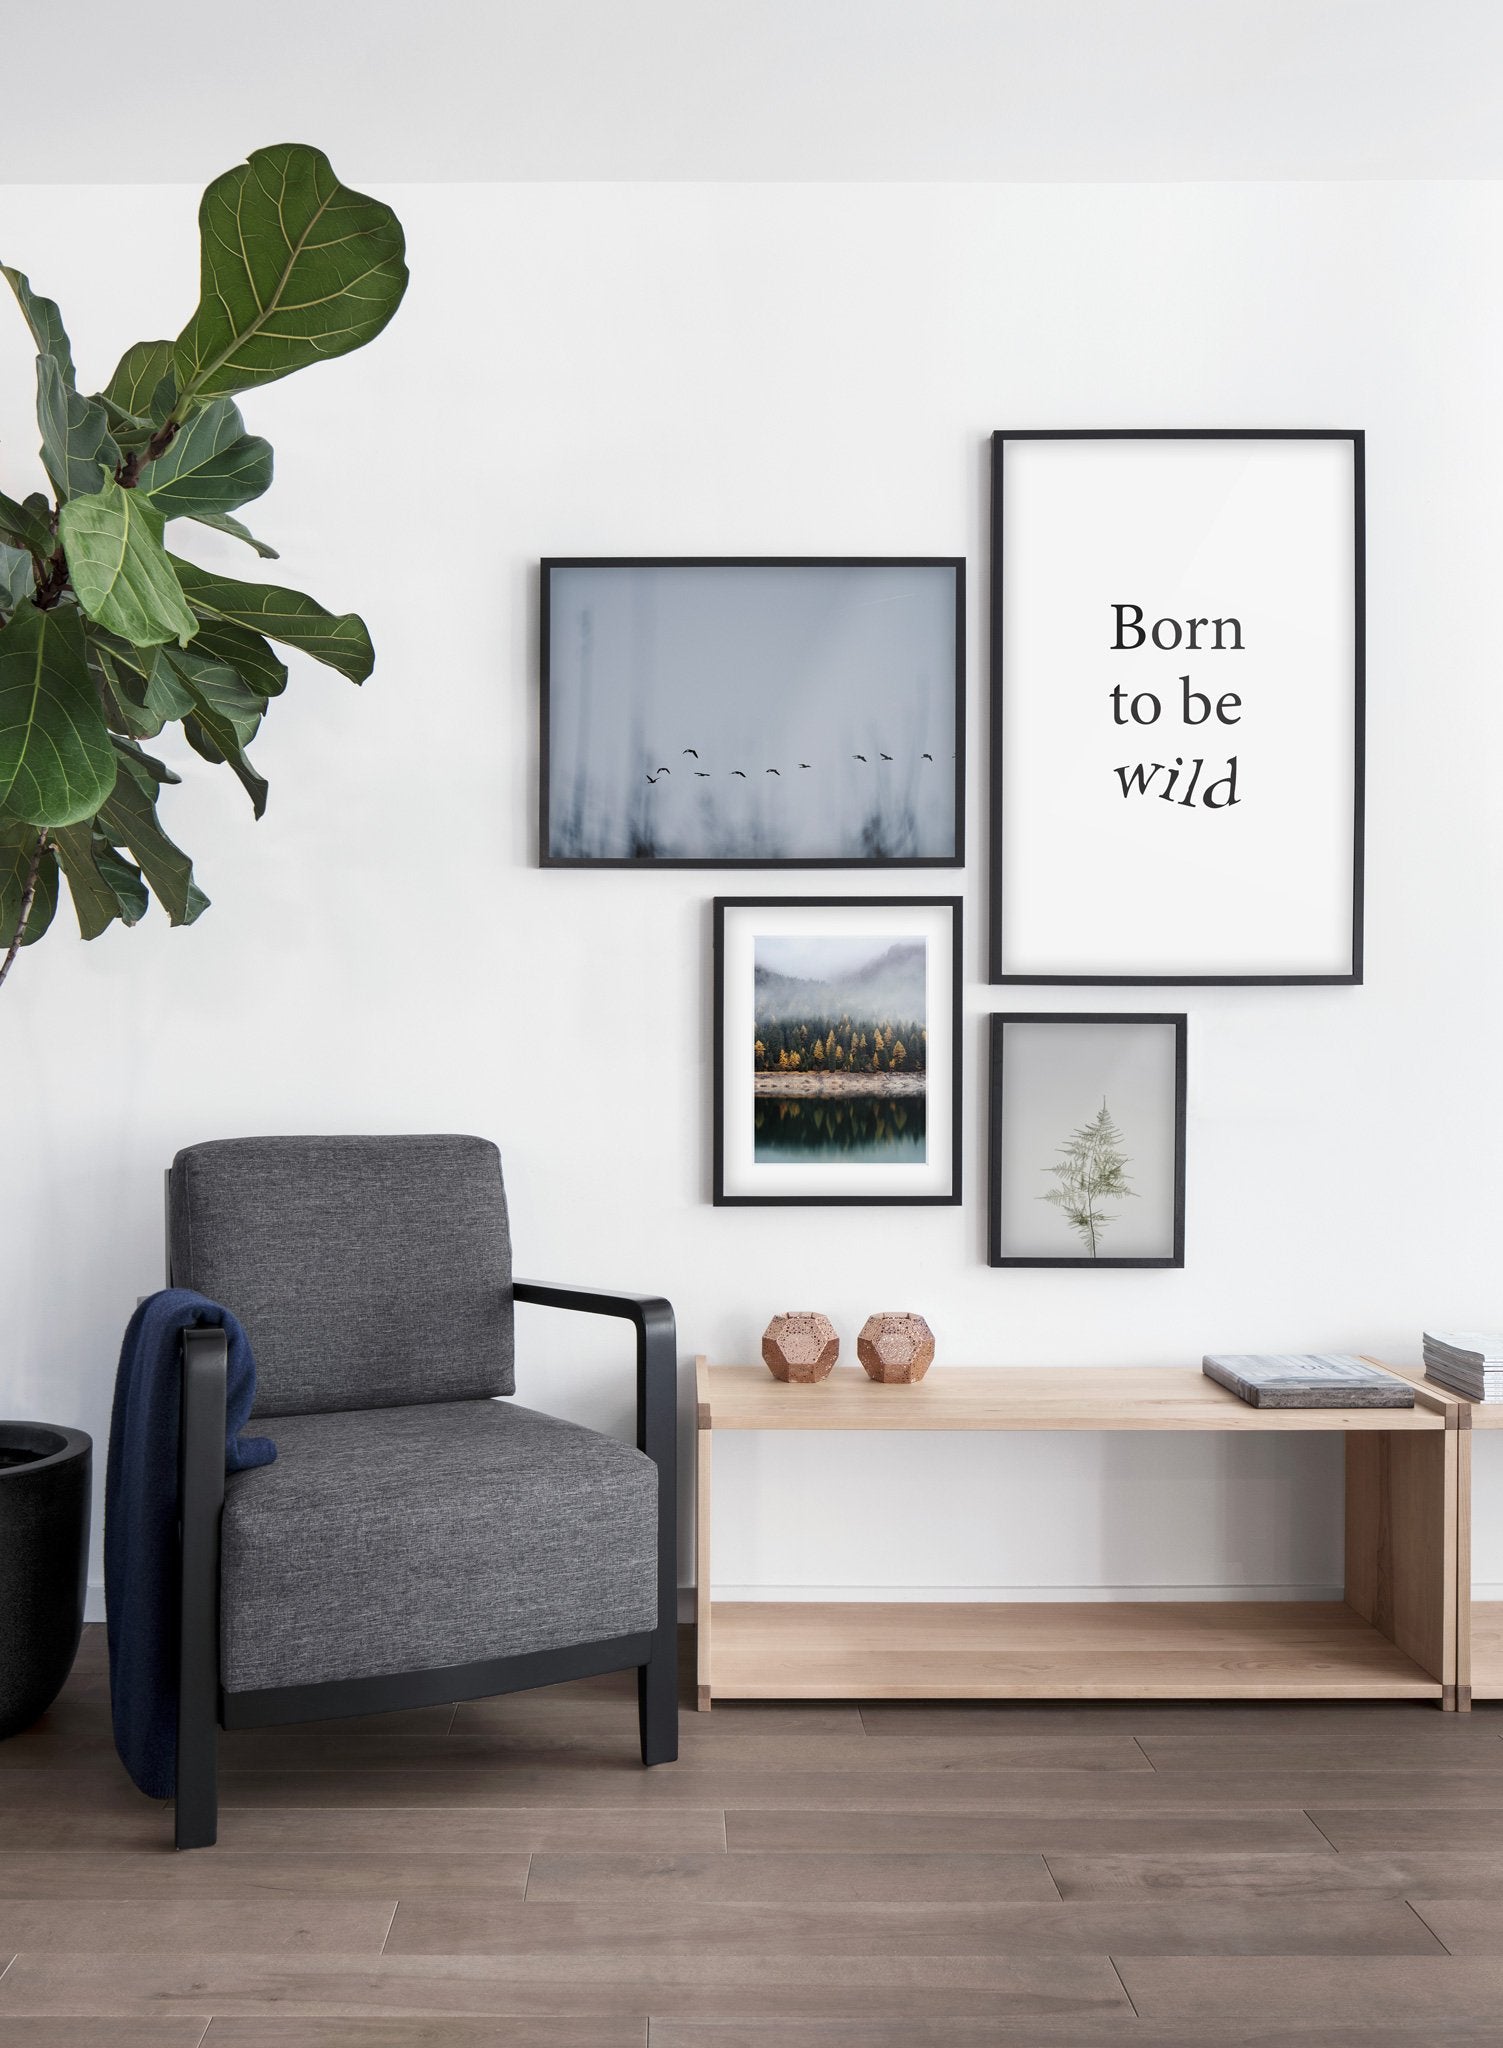 Bird Formation modern minimalist photography poster by Opposite Wall -Living room with gallery wall